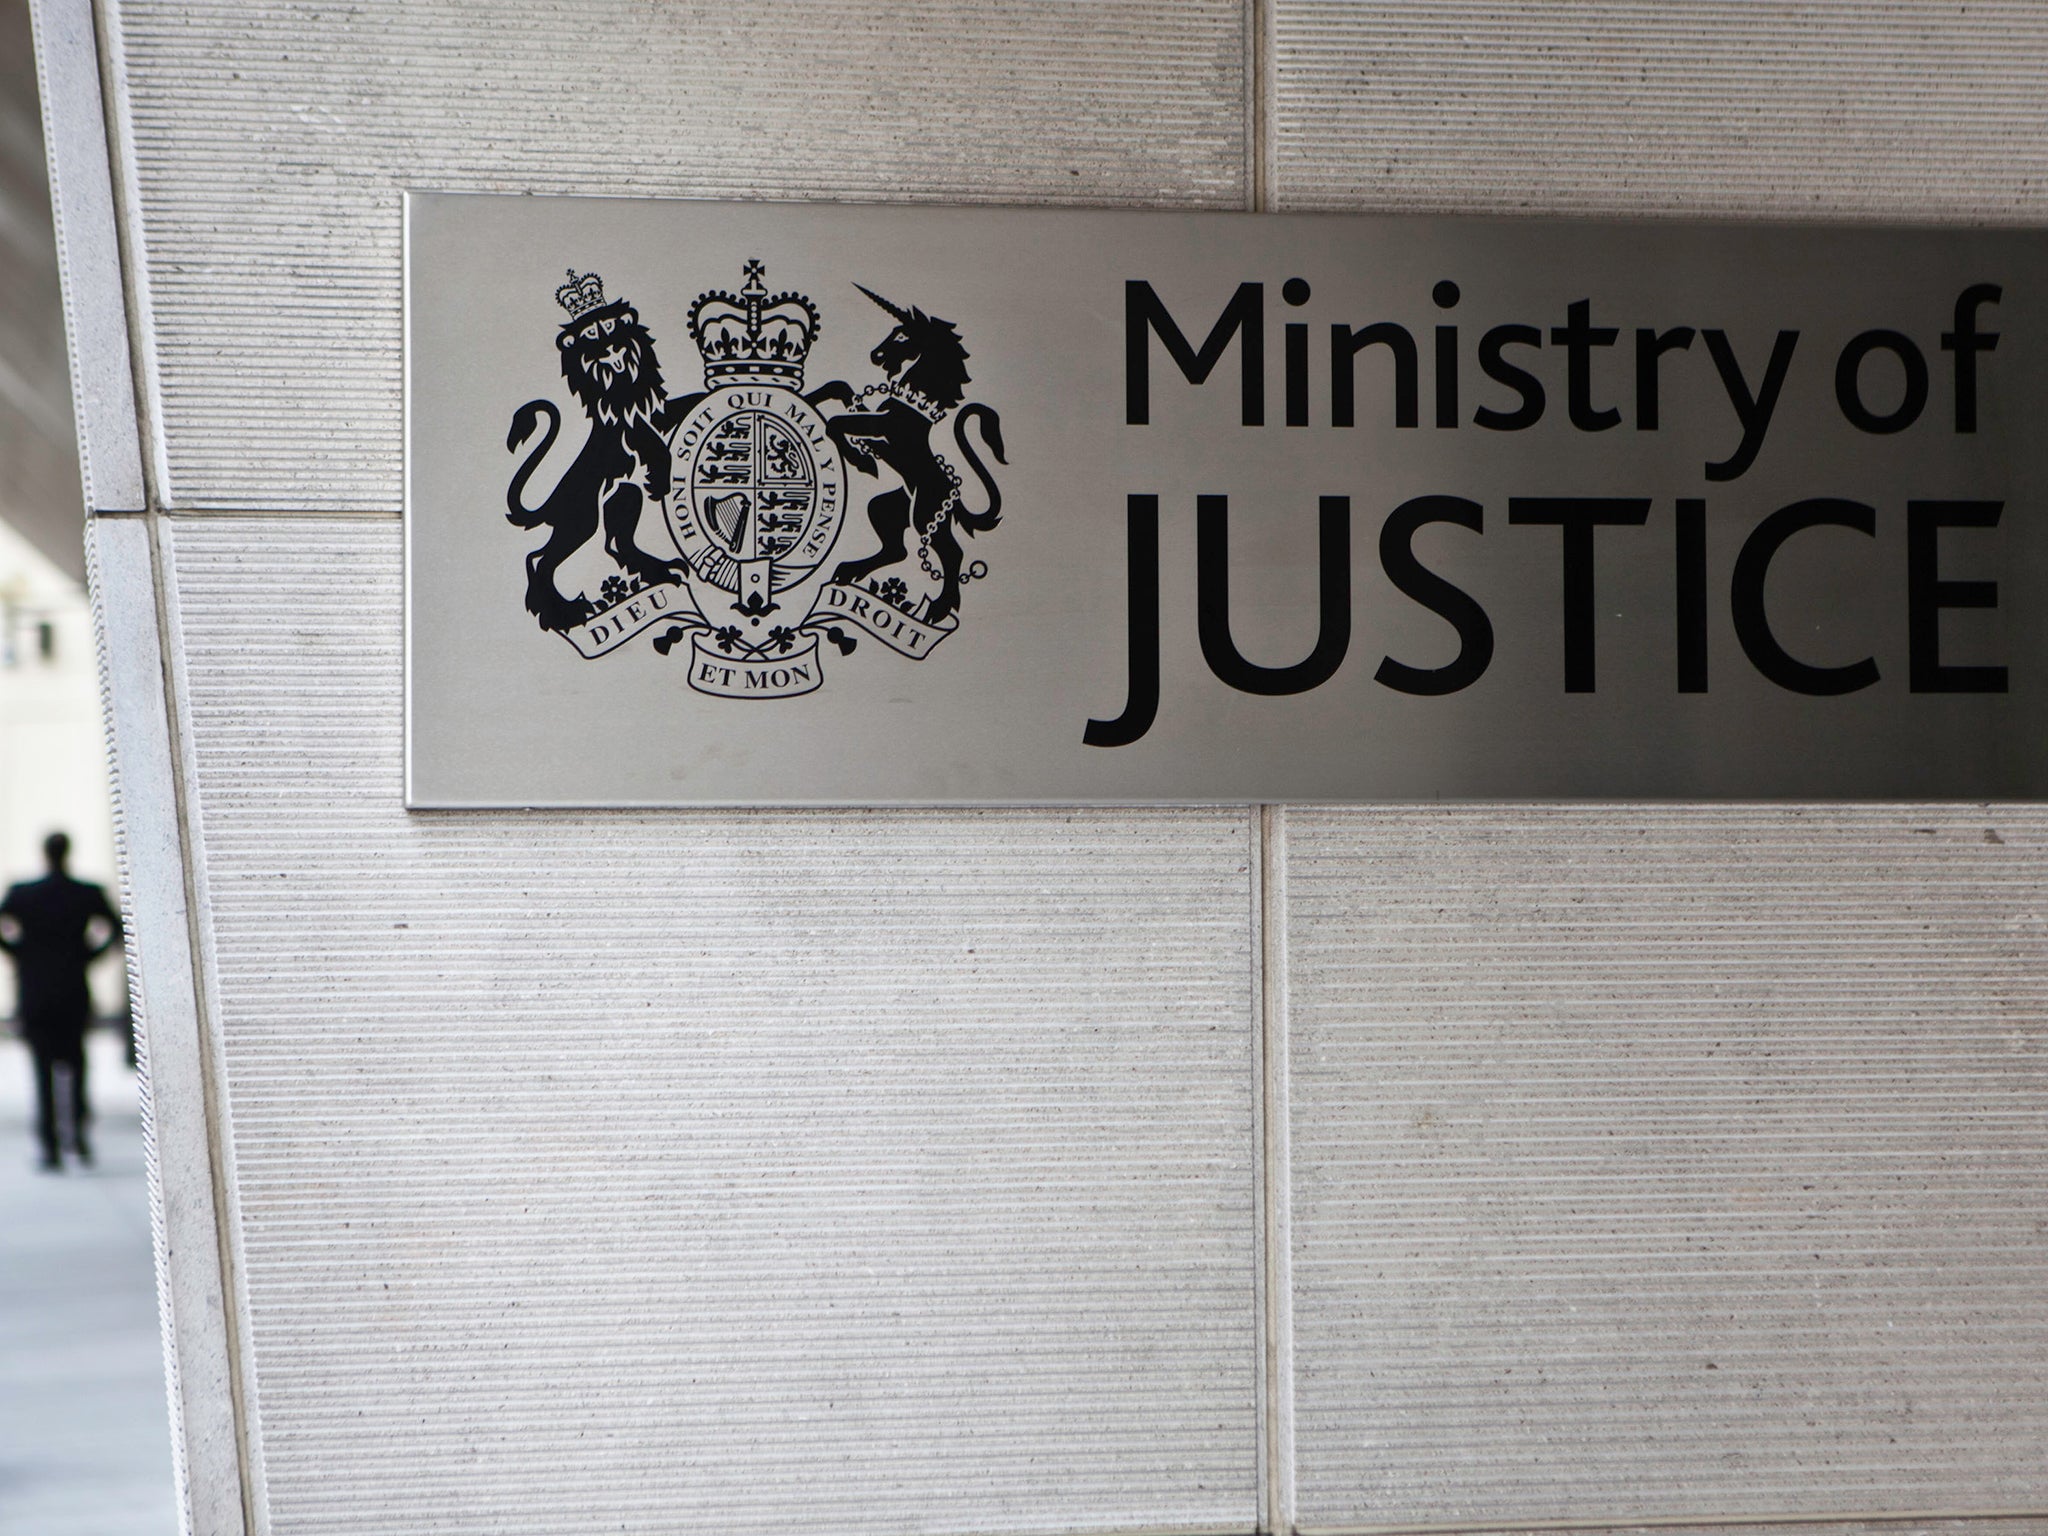 The Ministry of Justice has announced that it is abandoning its procurement competition for the collection of fines and fixed penalties